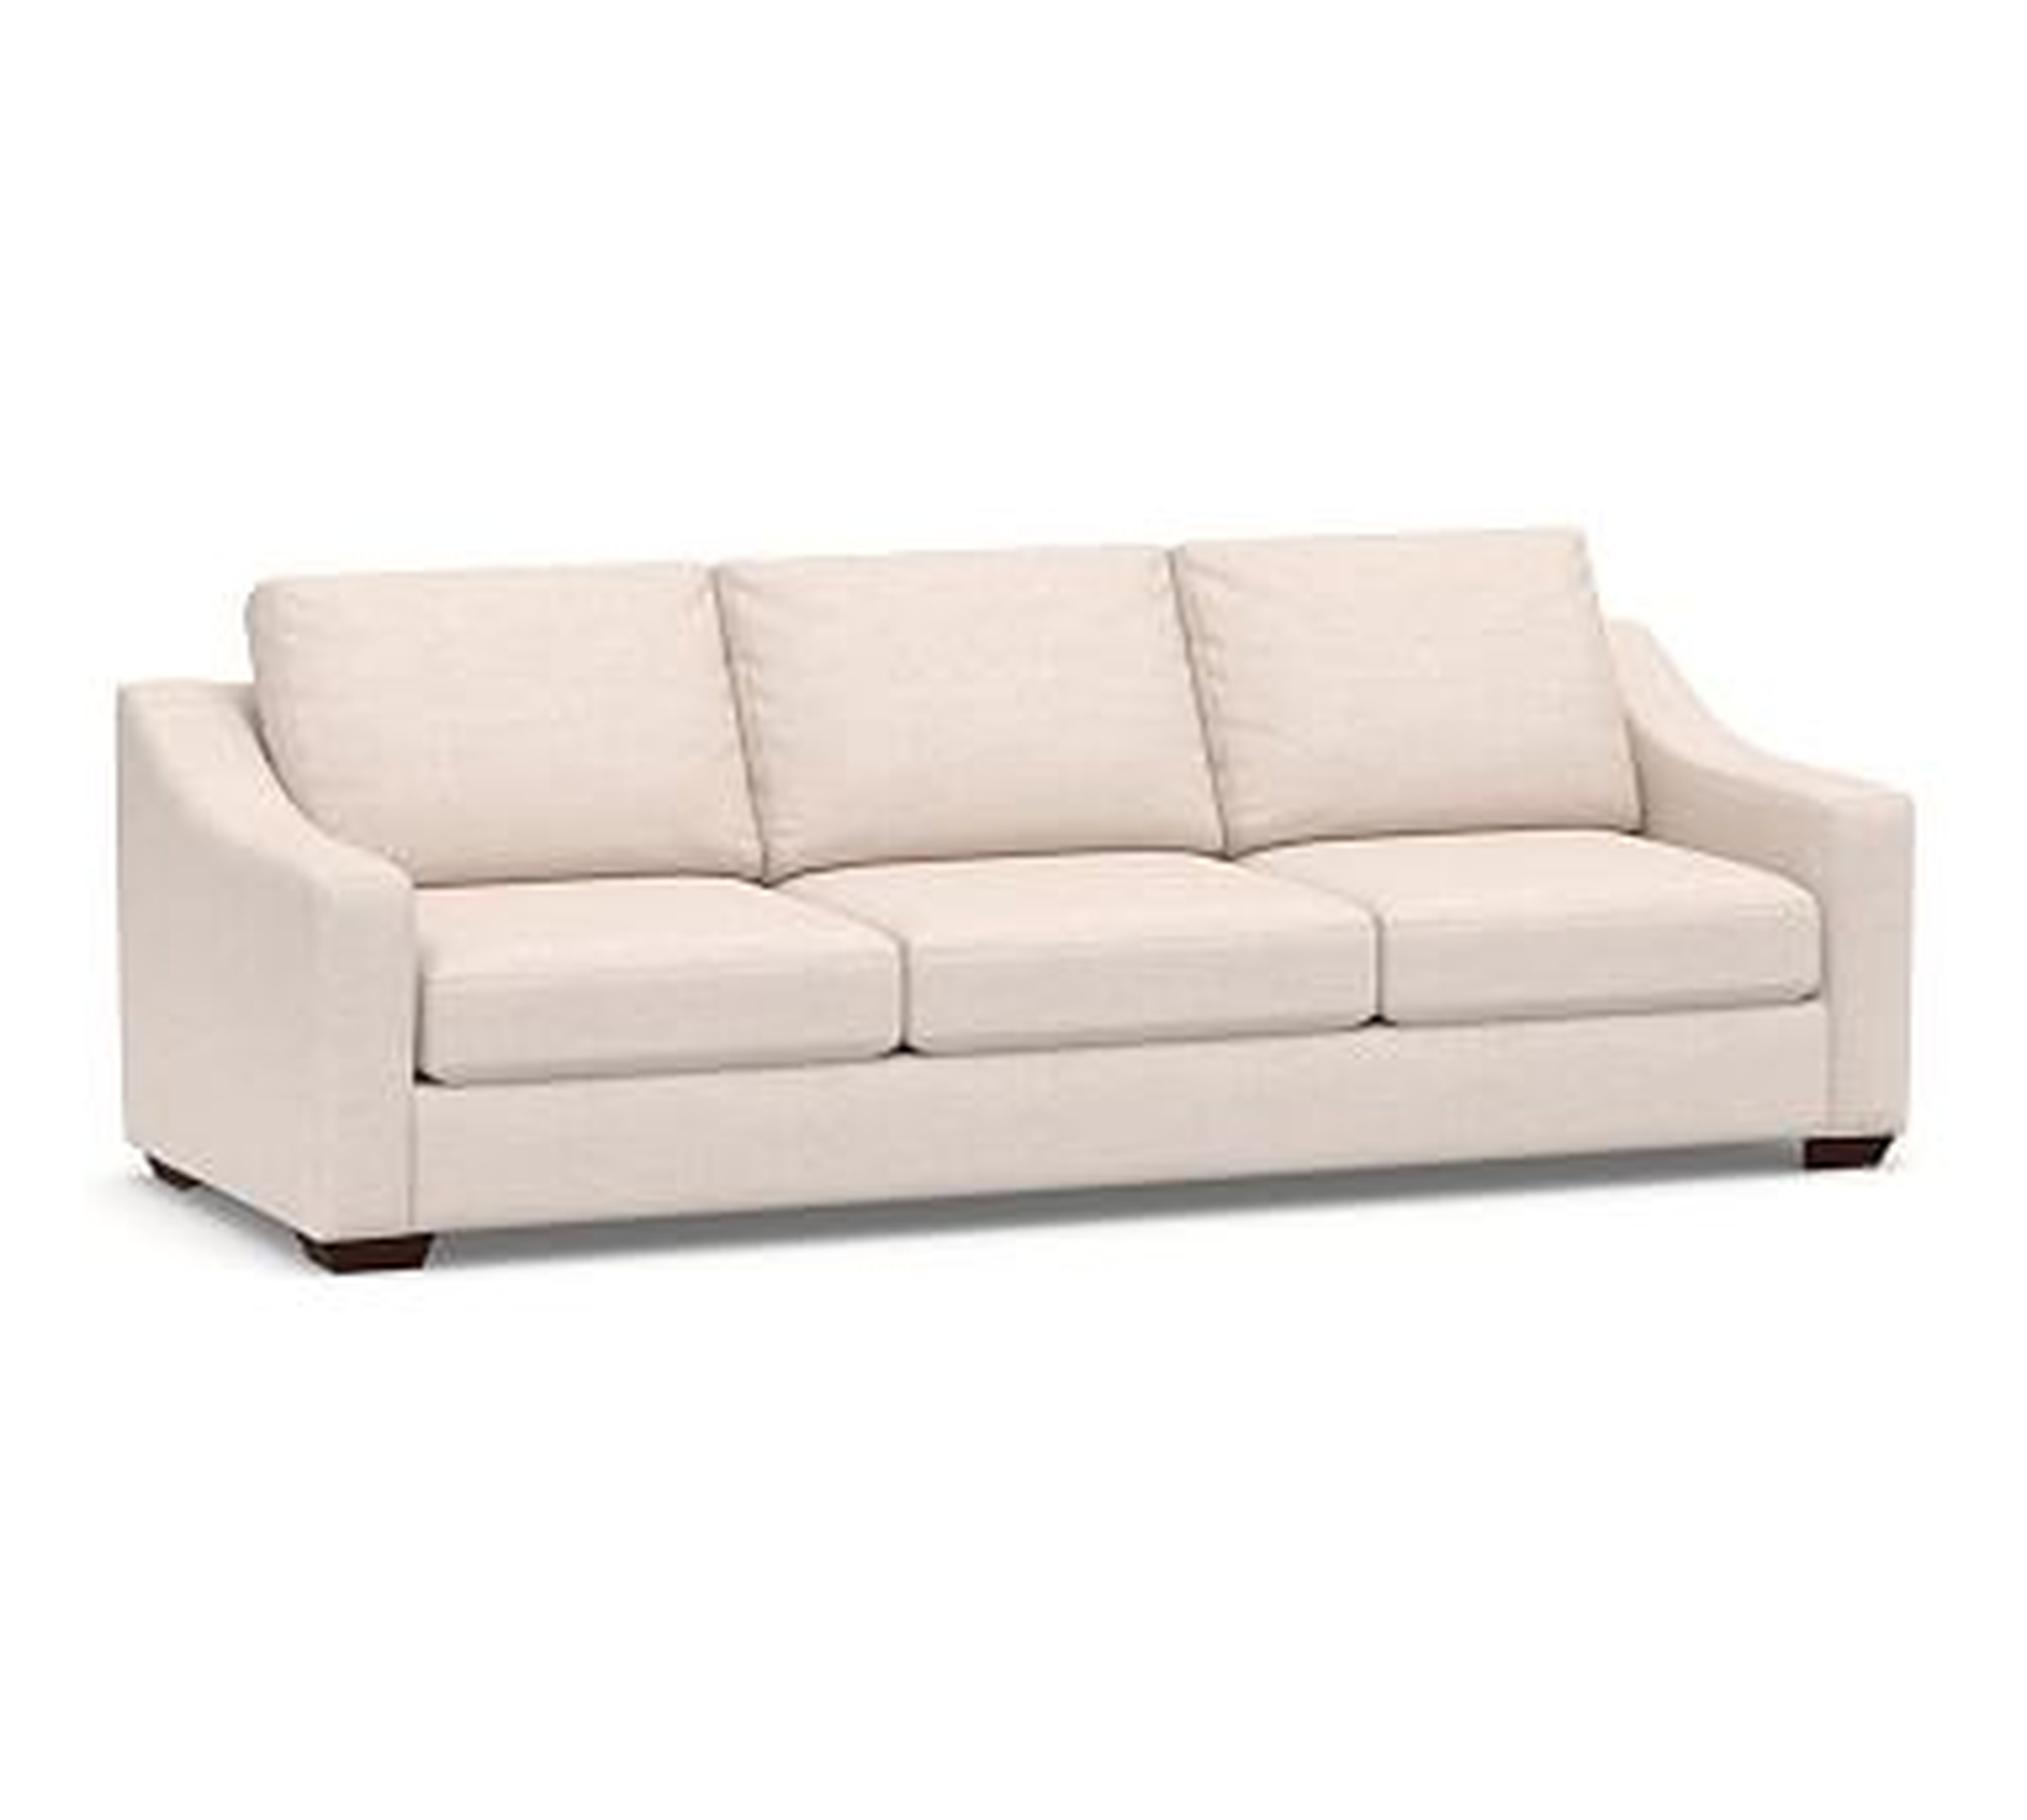 Big Sur Slope Arm Upholstered Grand Sofa 105", Down Blend Wrapped Cushions, Performance Everydaylinen(TM) by Crypton(R) Home Ivory - Pottery Barn